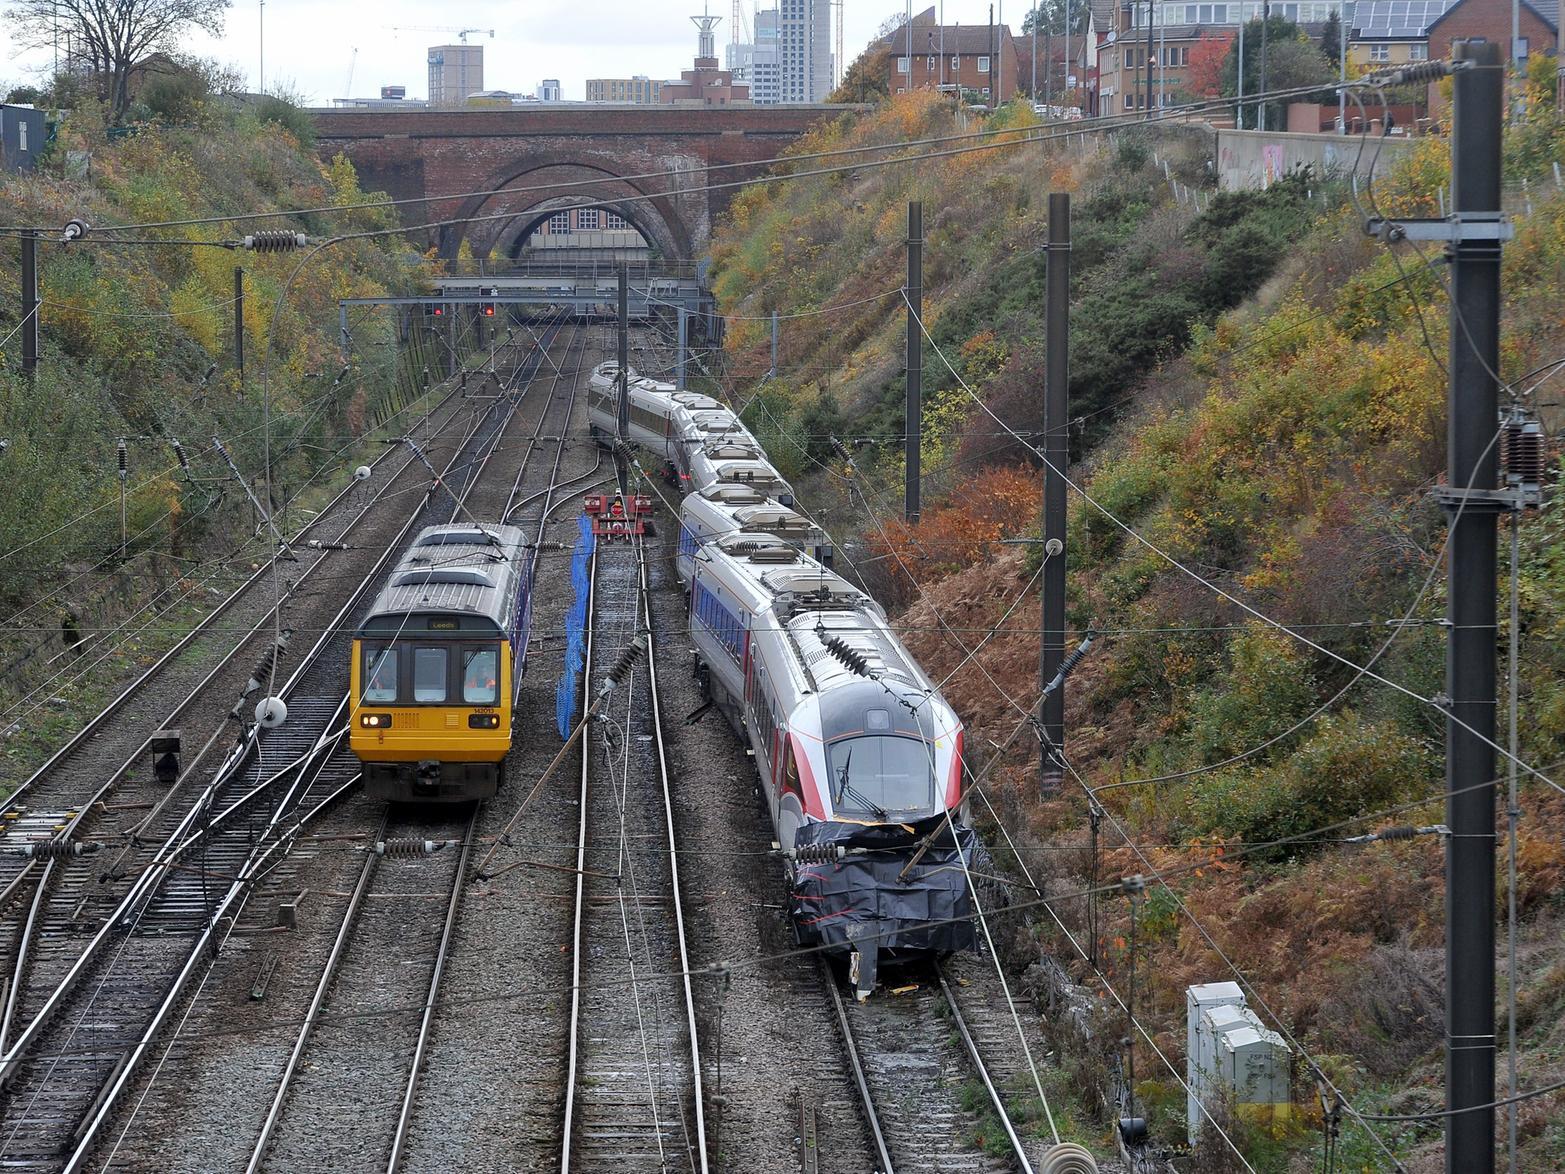 The incident caused severe disruption to train services during rush hour.